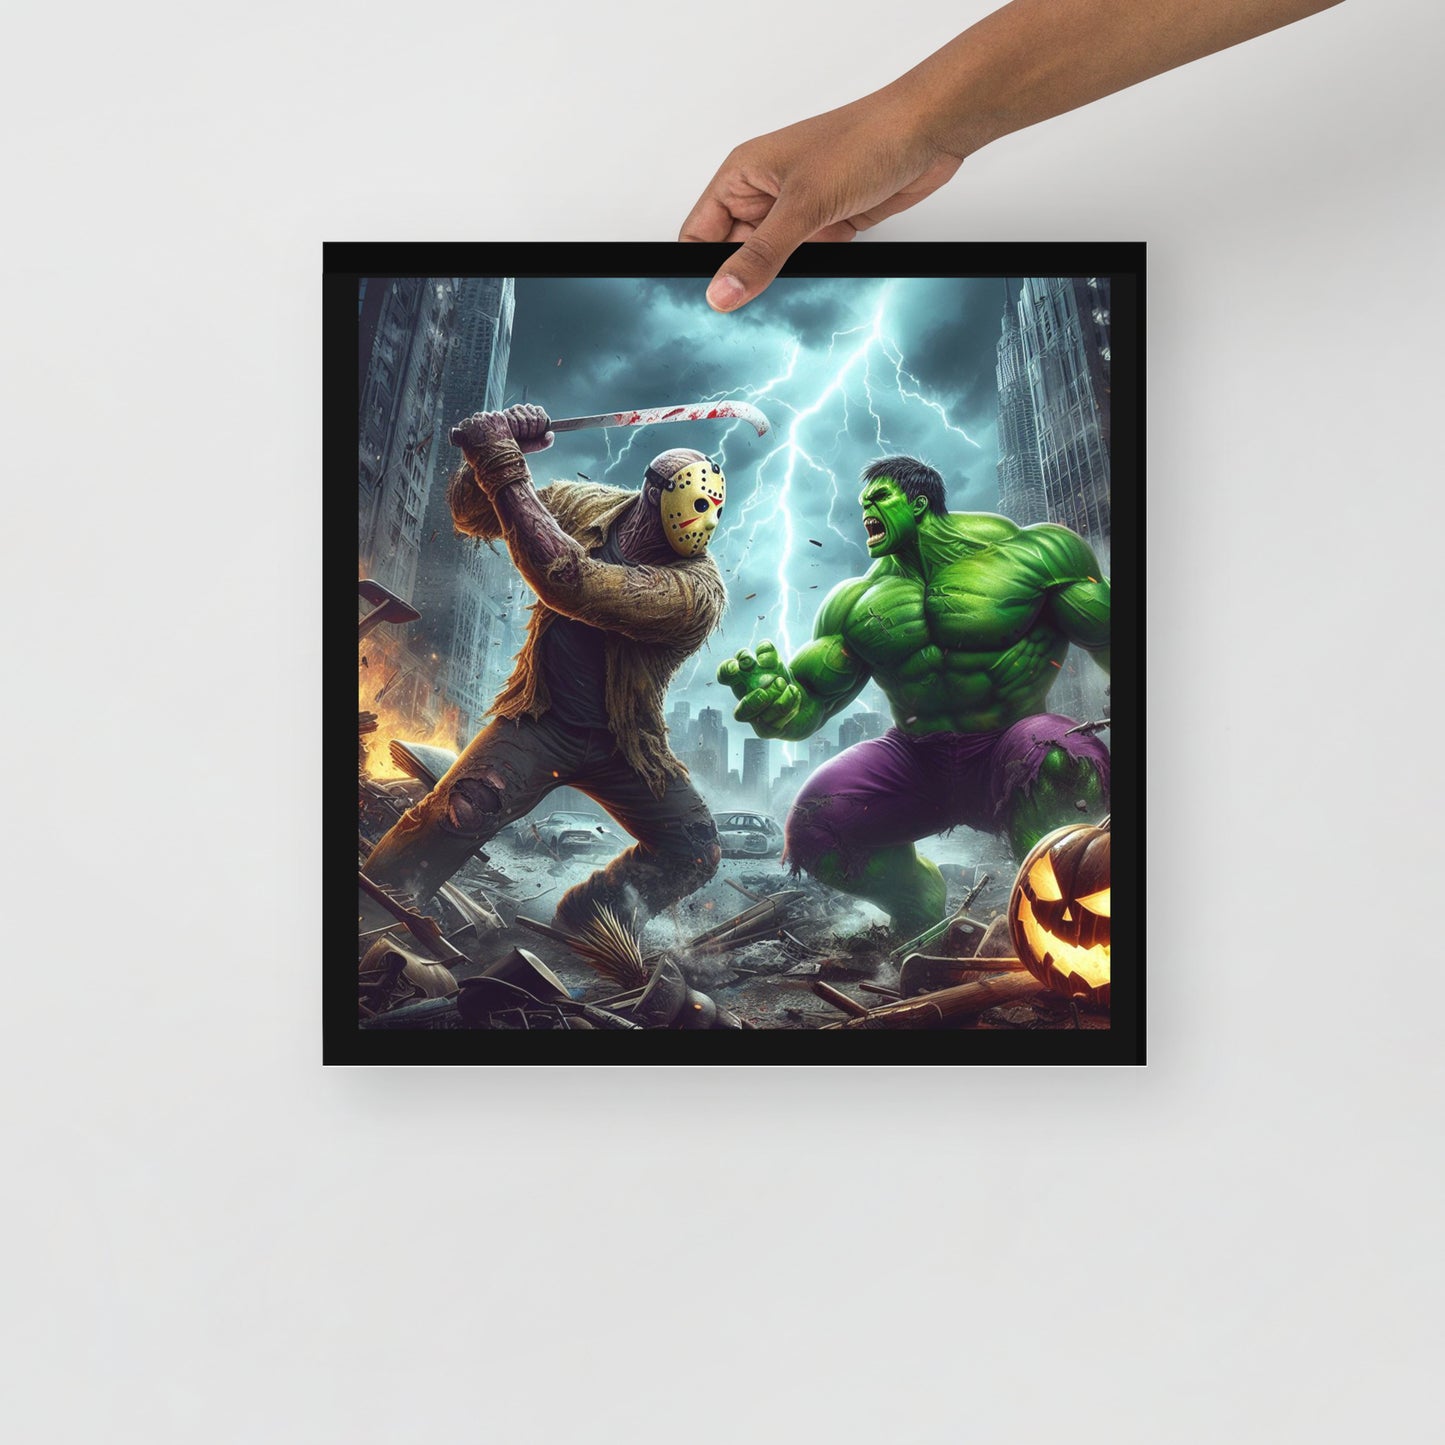 Jason Voorhees vs The Hulk Poster - Clash of the Unstoppable Titans